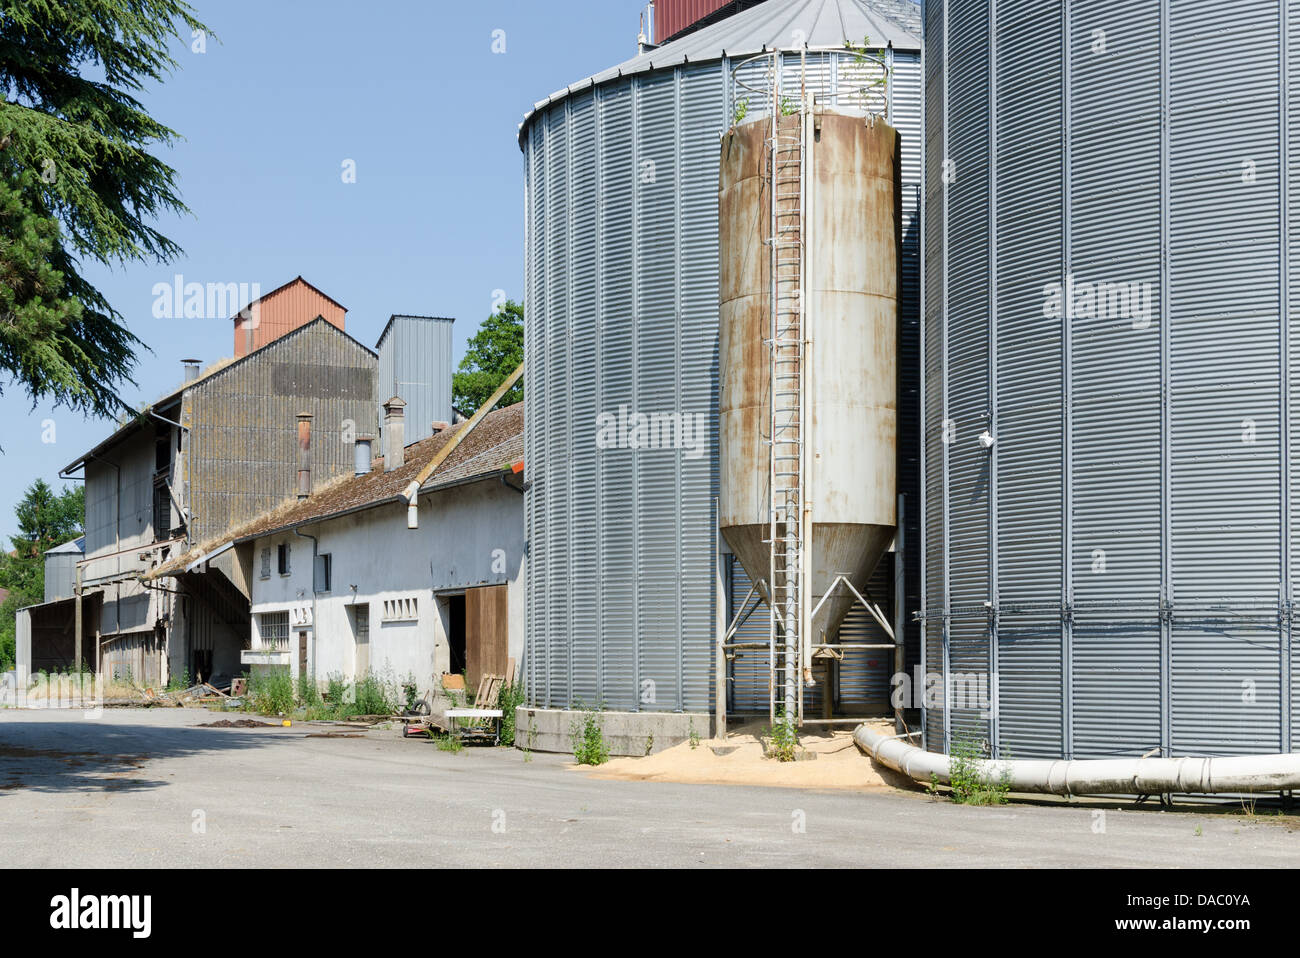 Large metal grain silos in Chevry, Eastern France Stock Photo